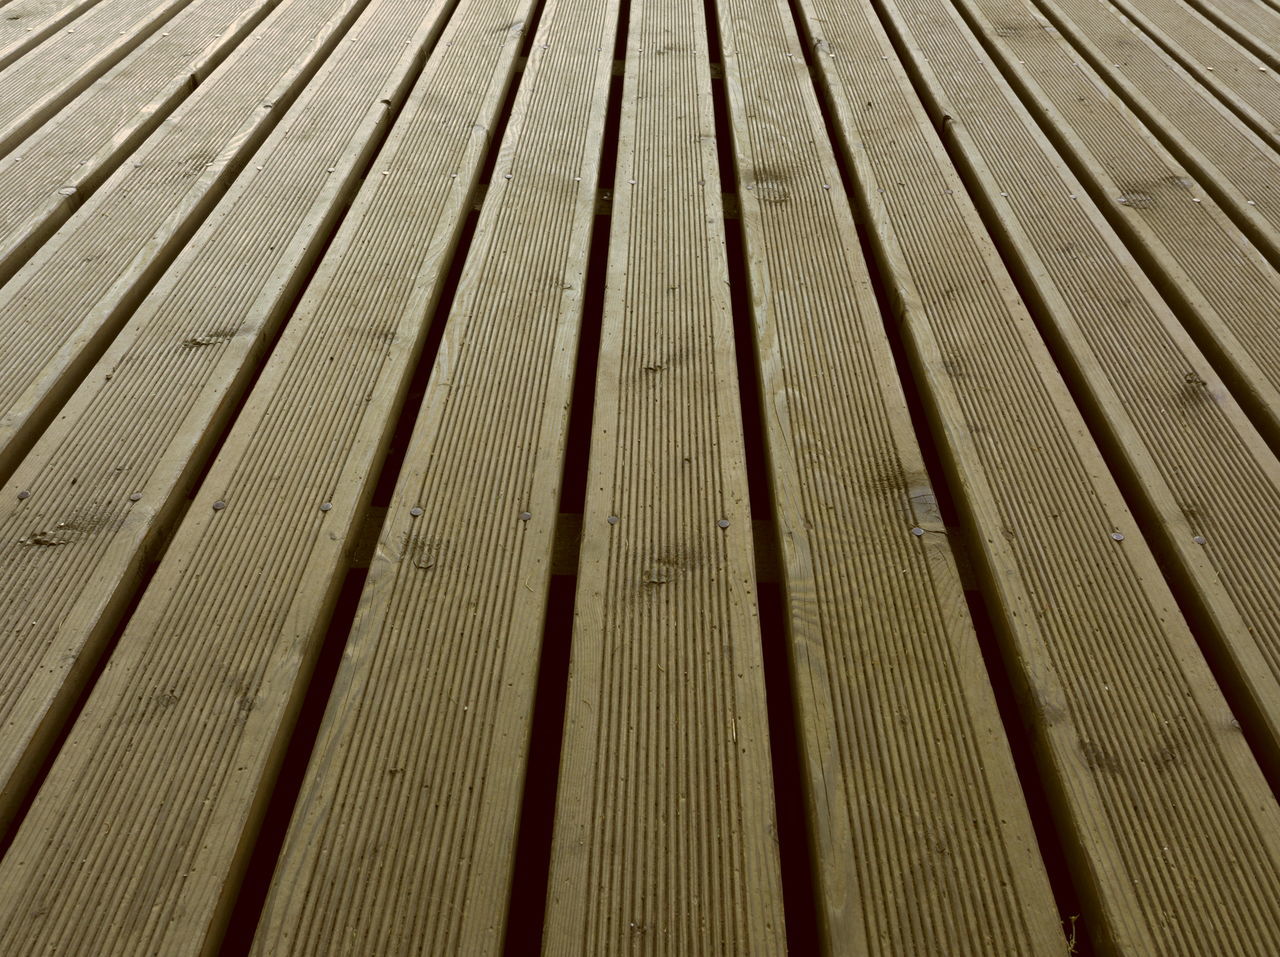 pattern, backgrounds, full frame, wood, floor, textured, no people, flooring, hardwood, line, wood flooring, plank, repetition, in a row, day, high angle view, close-up, laminate flooring, floorboard, outdoors, brown, boardwalk, striped, nature, side by side, sunlight, wood grain